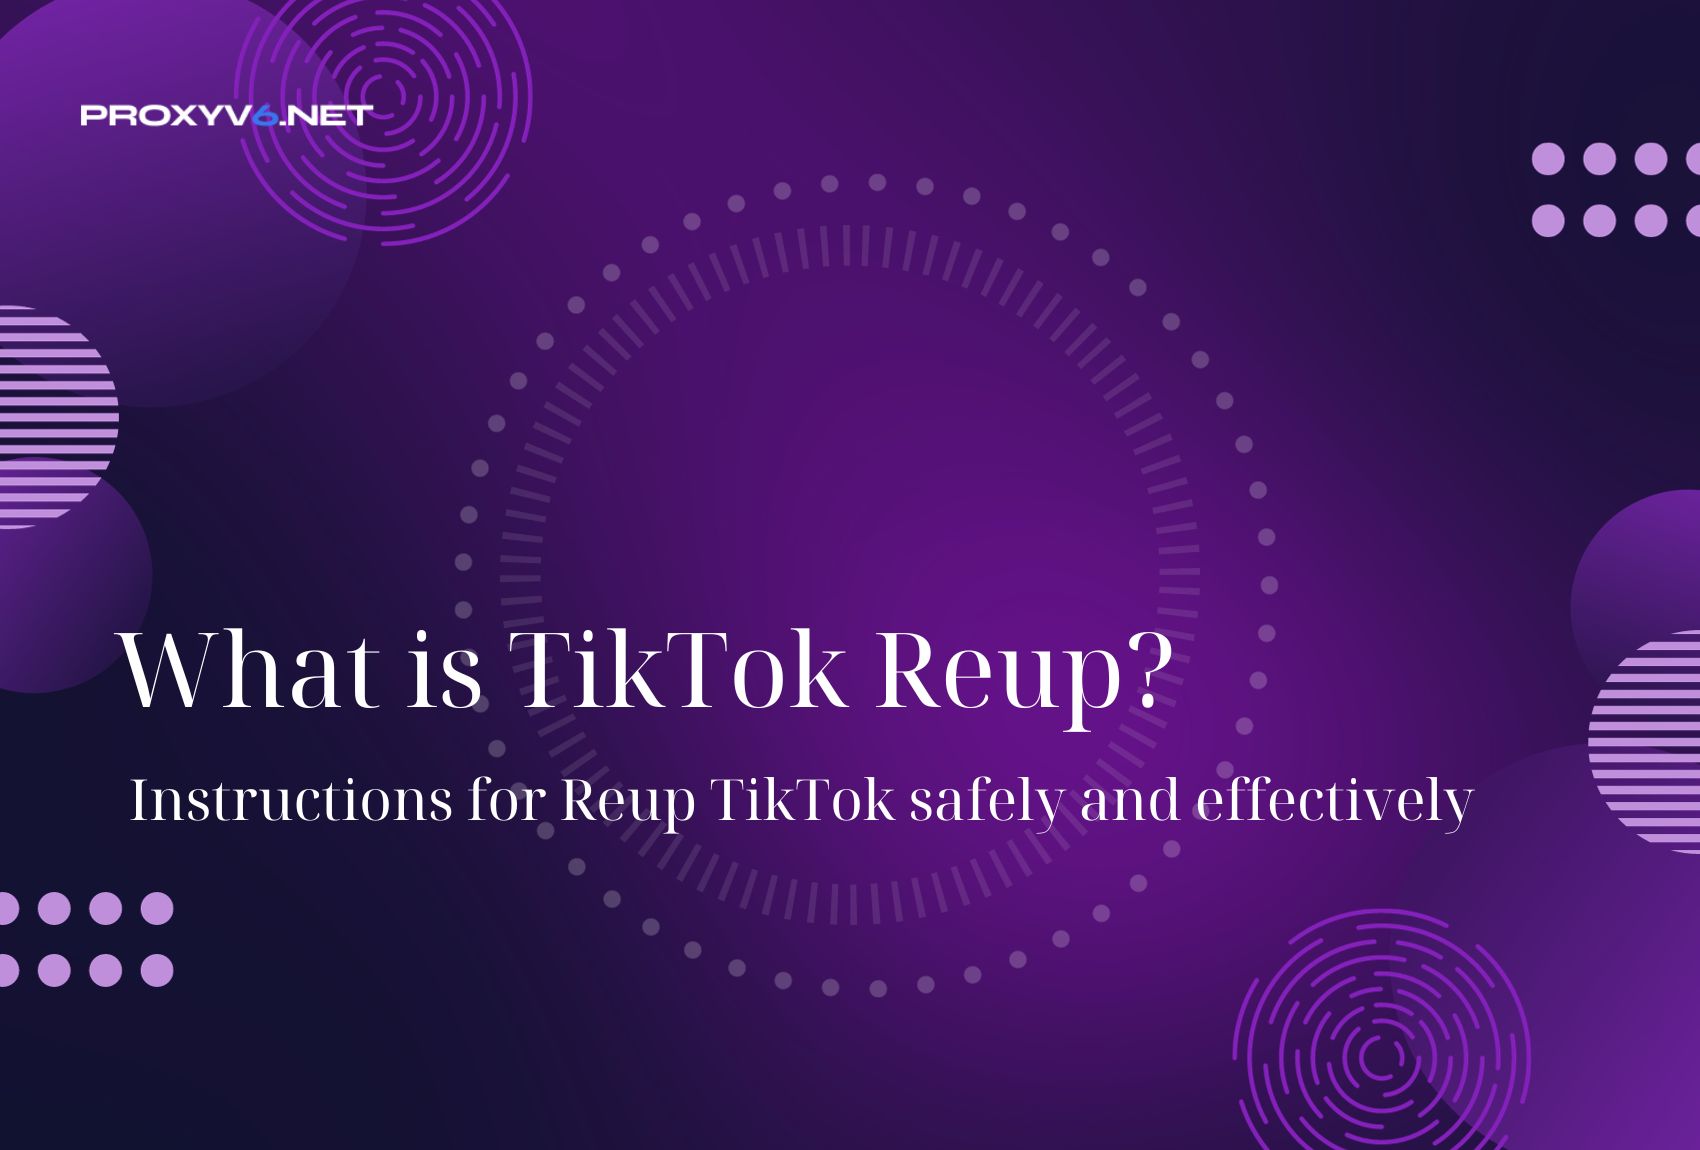 What is TikTok Reup? Instructions for Reup TikTok safely and effectively